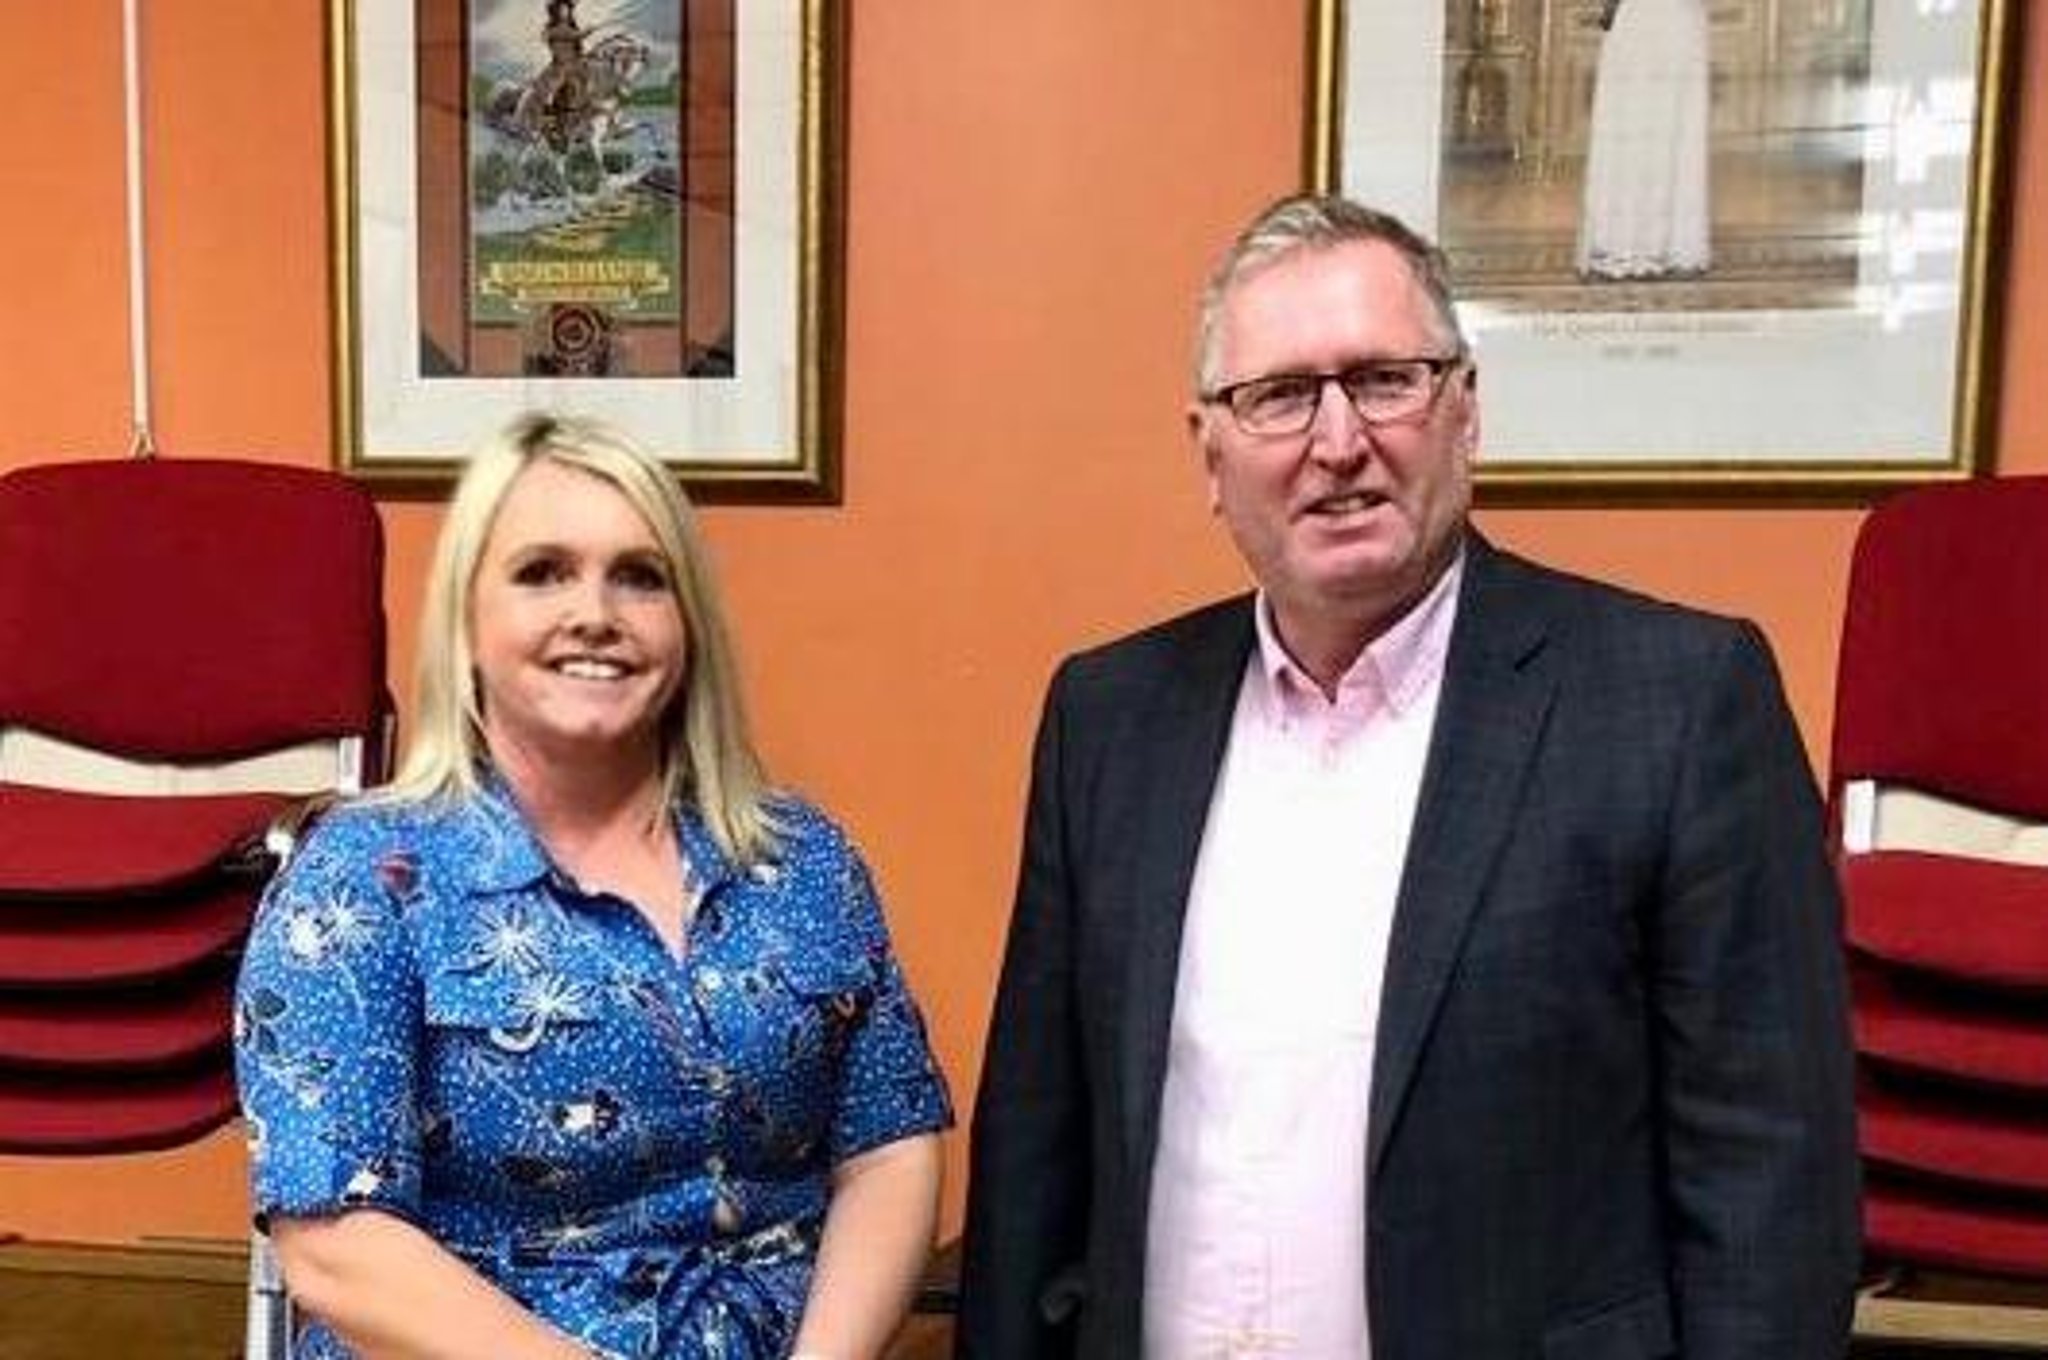 UUP stalwart welcomes 'new talent' Jill Macauley taking over as party chairwoman